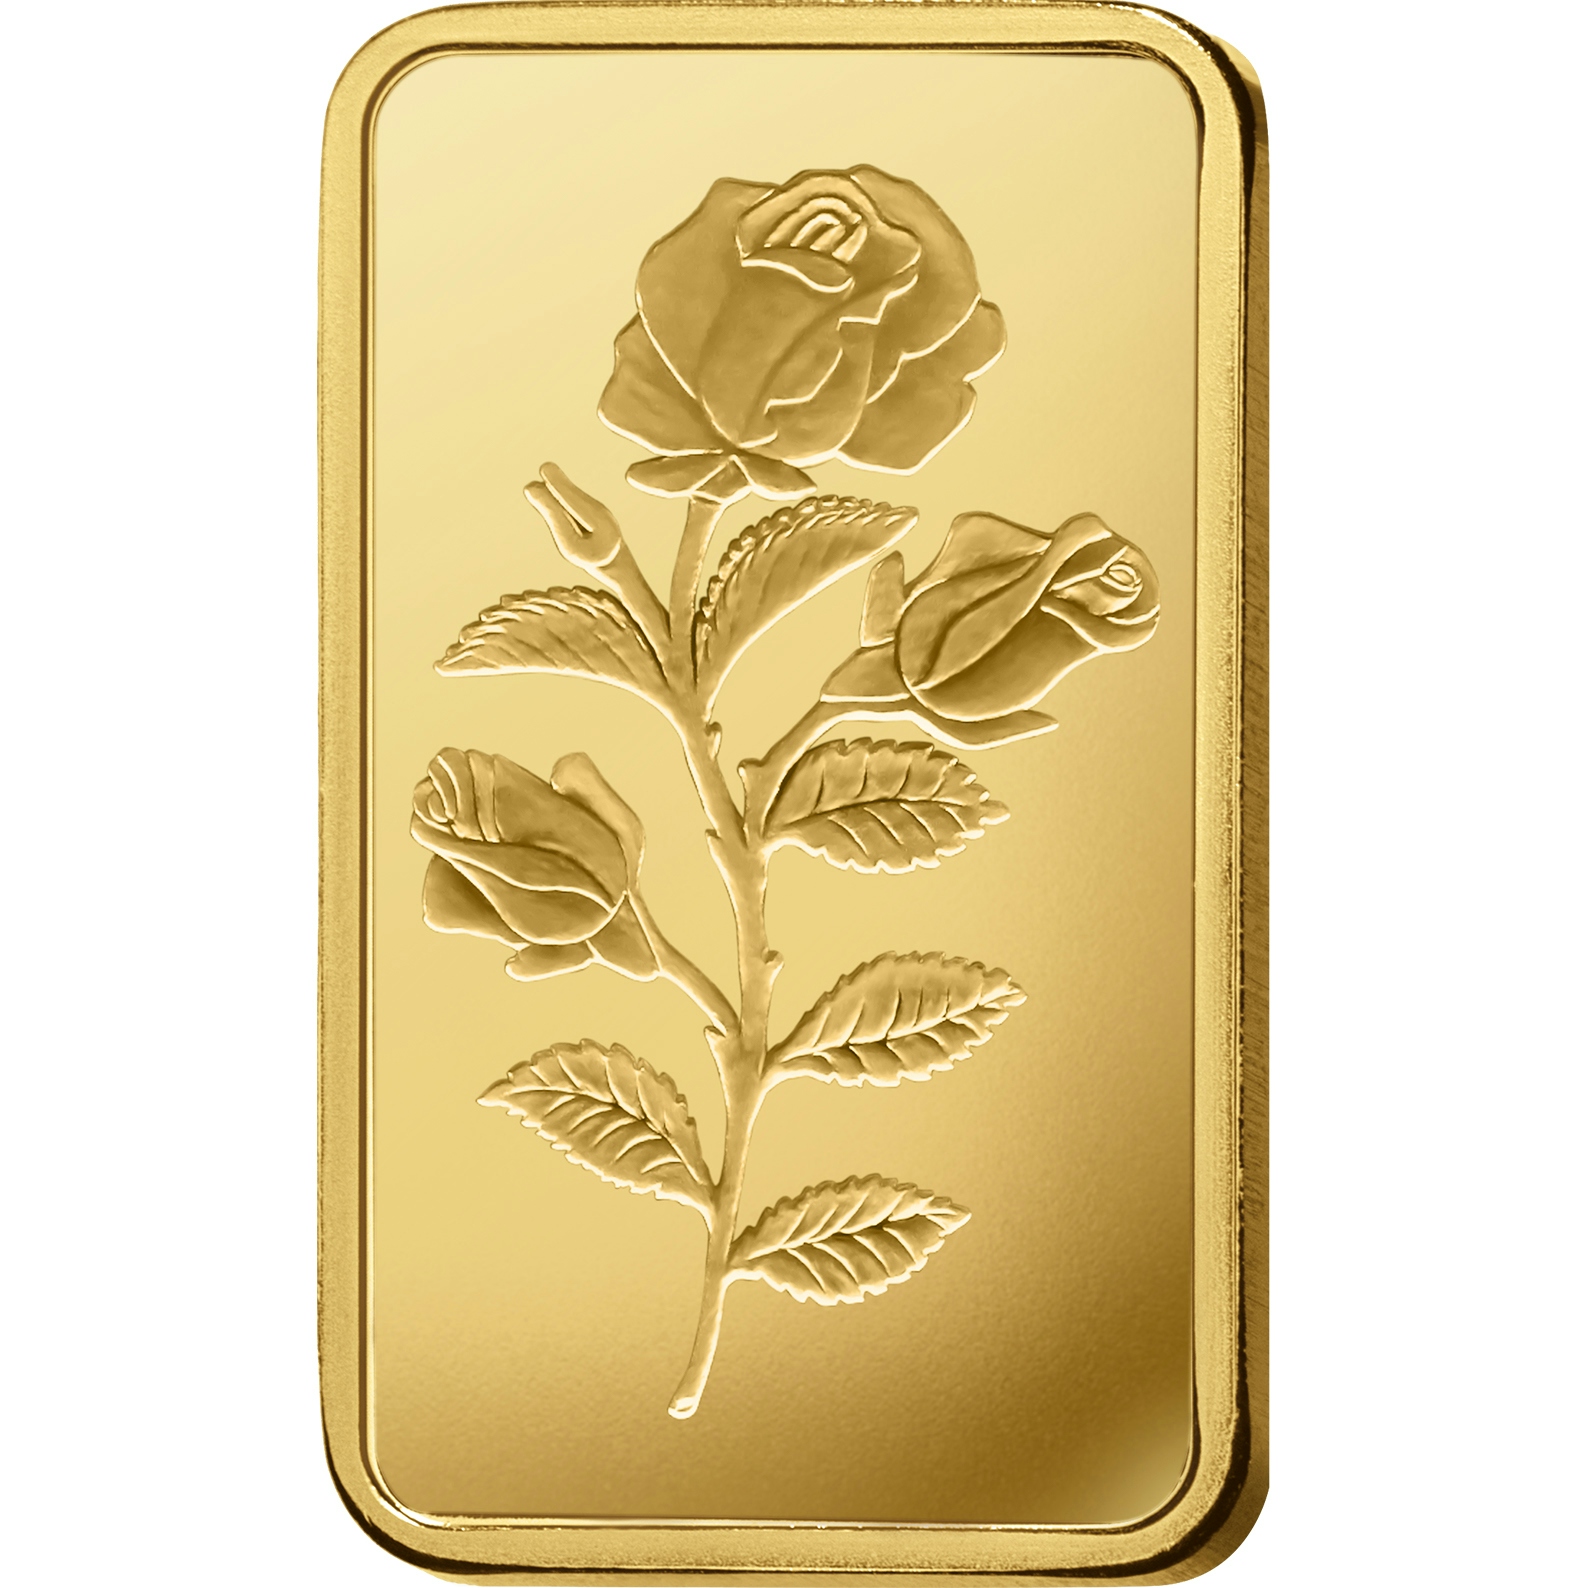 Achat d'or, 100 gram d'or pur Rosa - PAMP Suisse - Front 